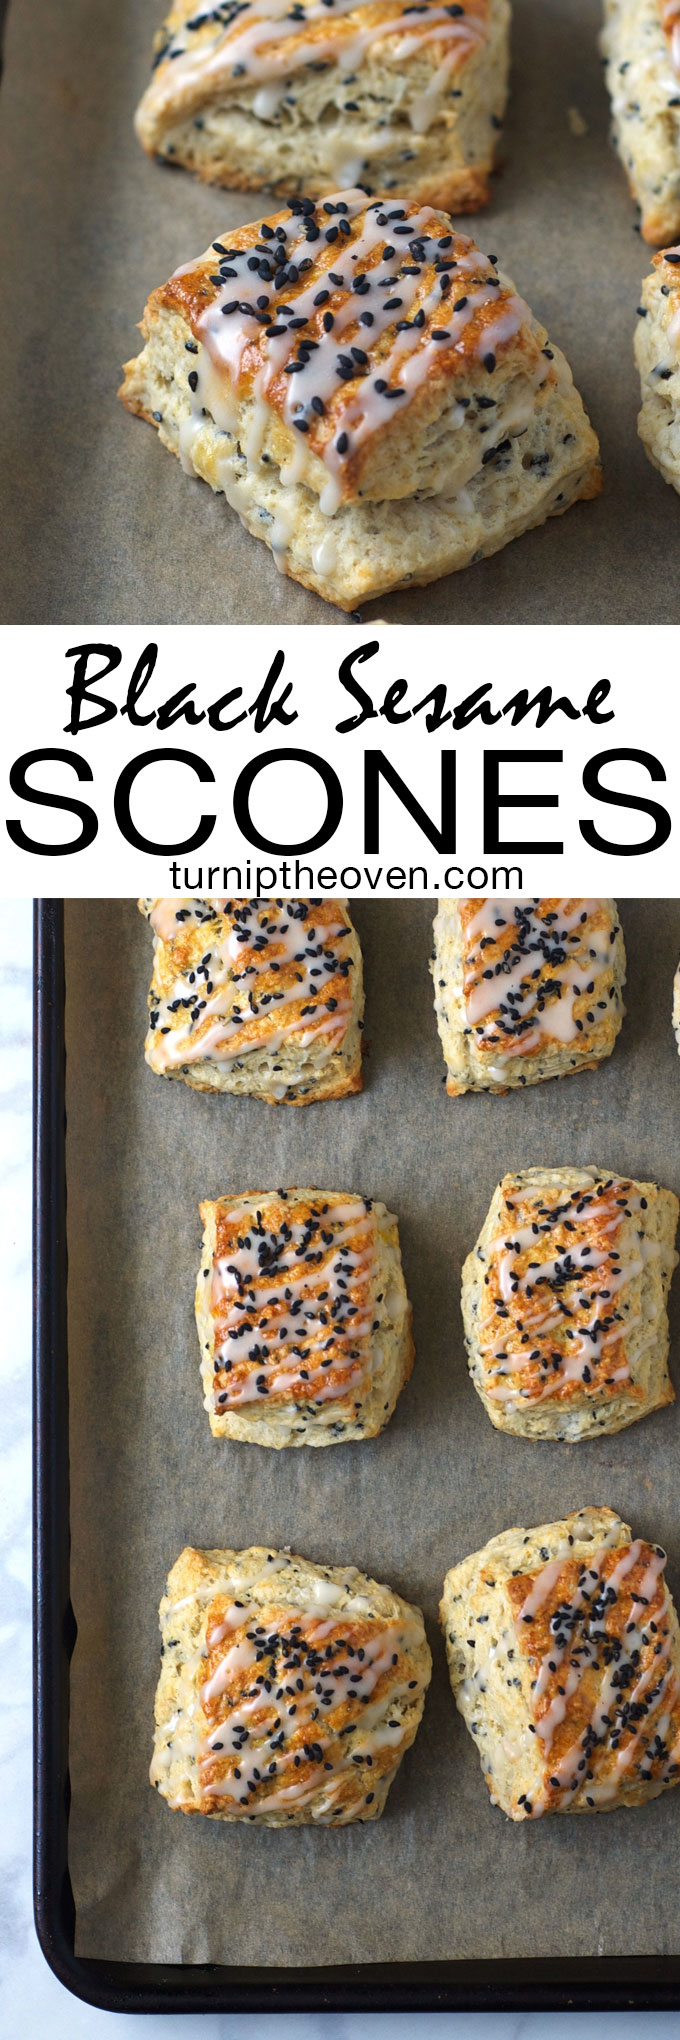 These simple black sesame scones are sweet, flaky, and impossibly tender. If you love to curl up with a mug of tea and an afternoon snack, this recipe is for you!